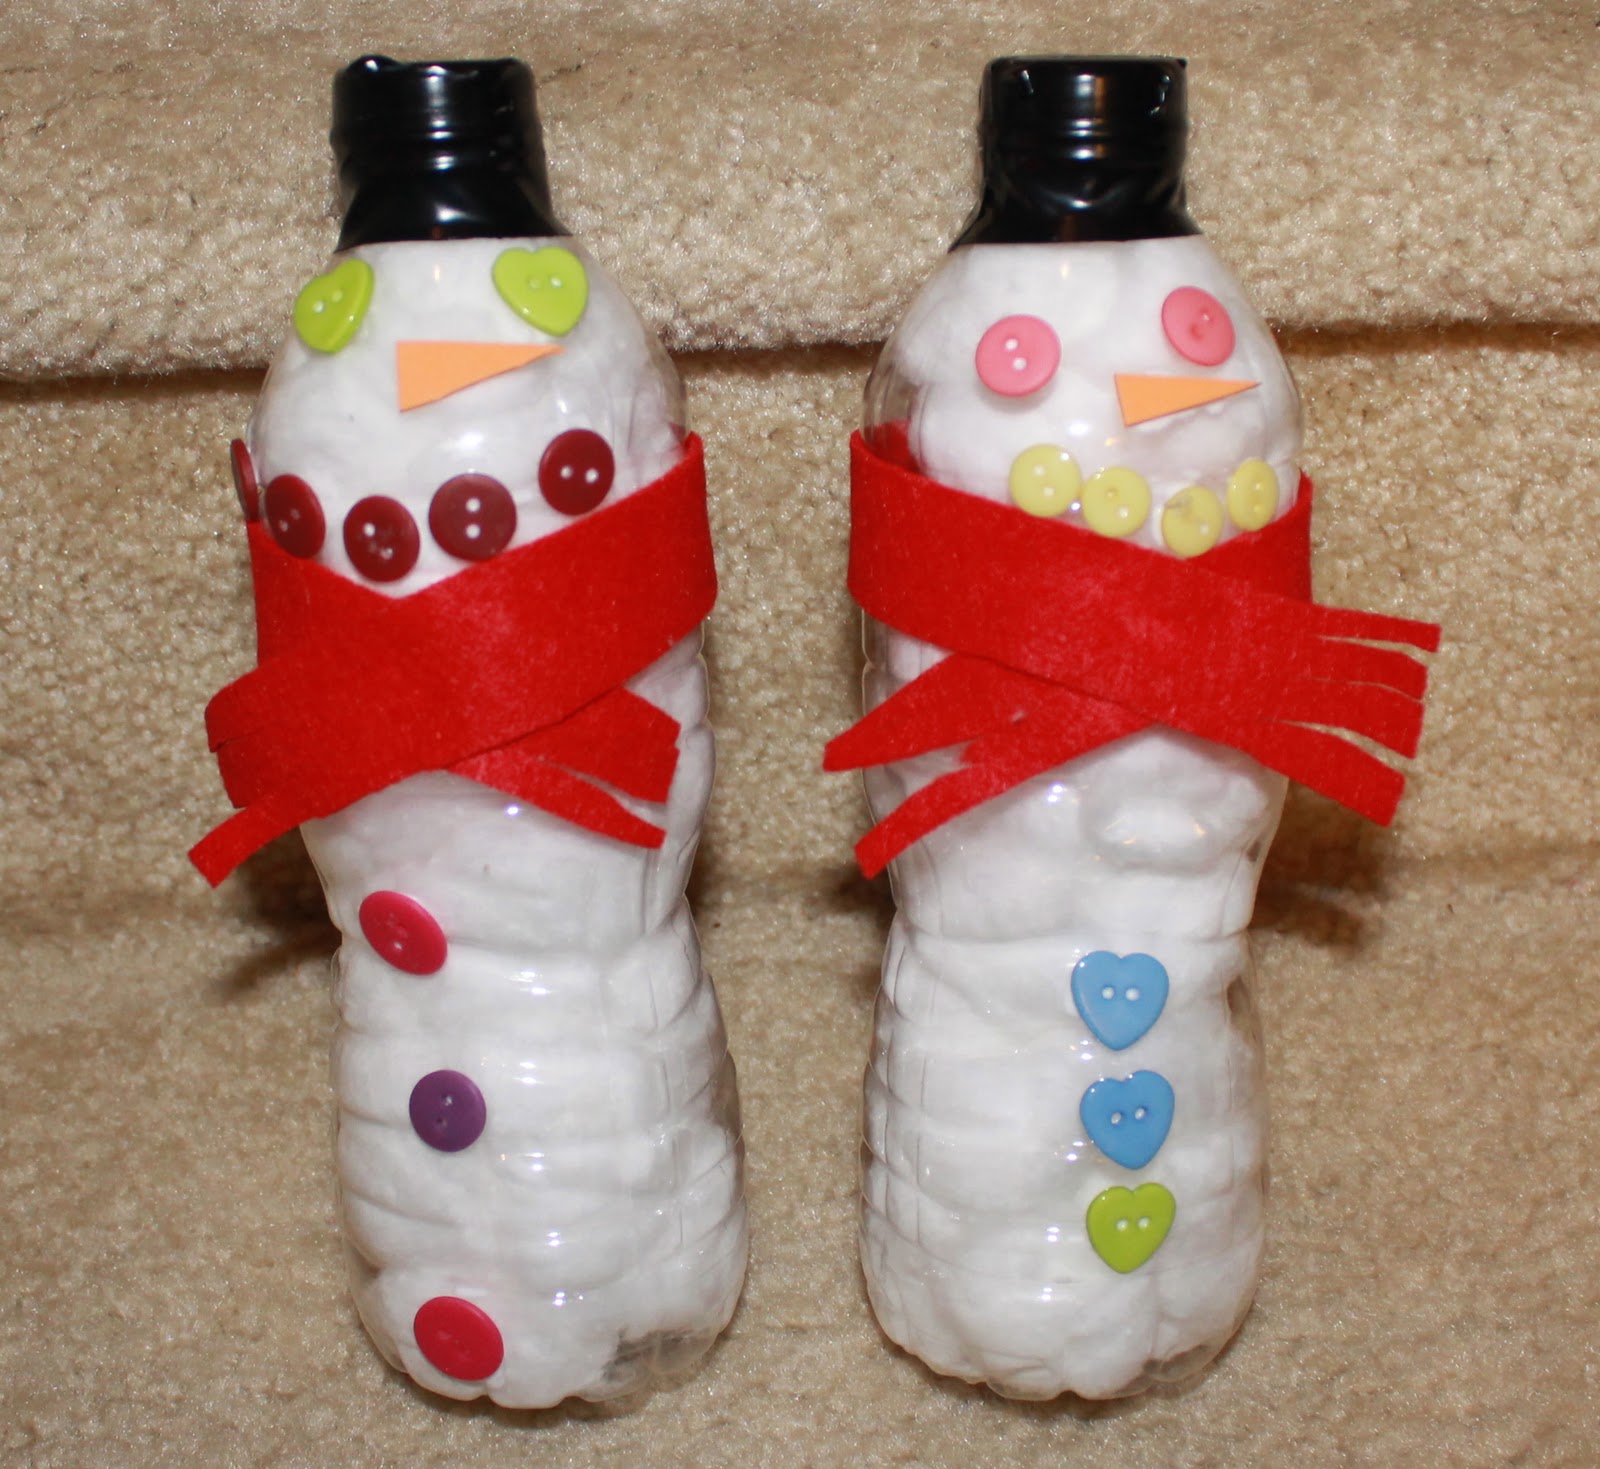 Water bottle shakers Recycled  Water bottle crafts, Water bottle art,  Bottle crafts